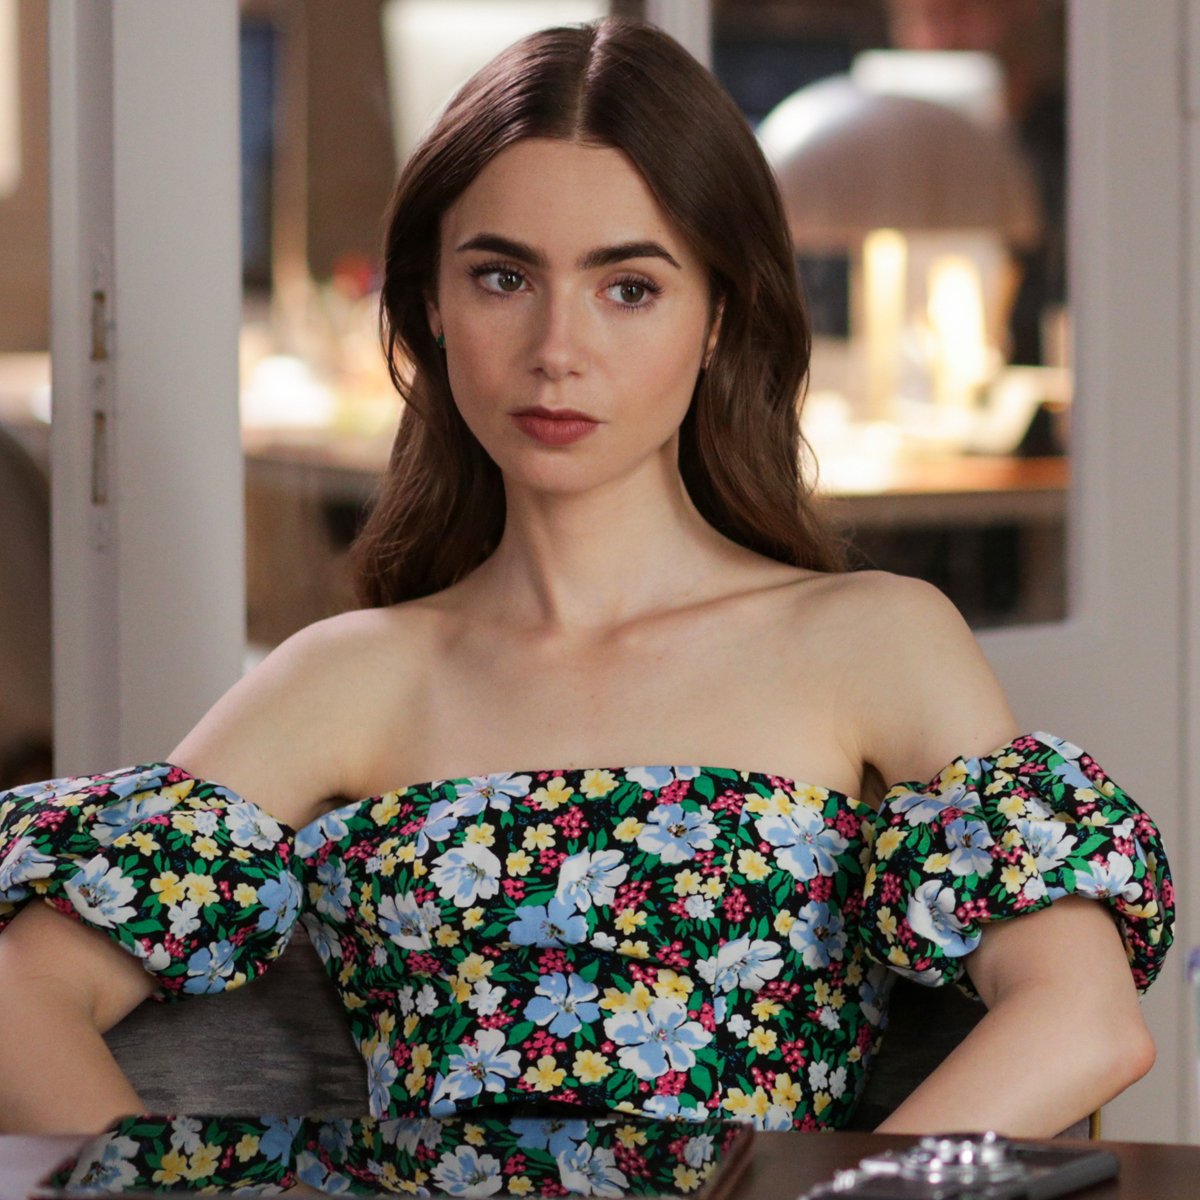 Emily in Paris' Lily Collins reacts to vandalised face billboard